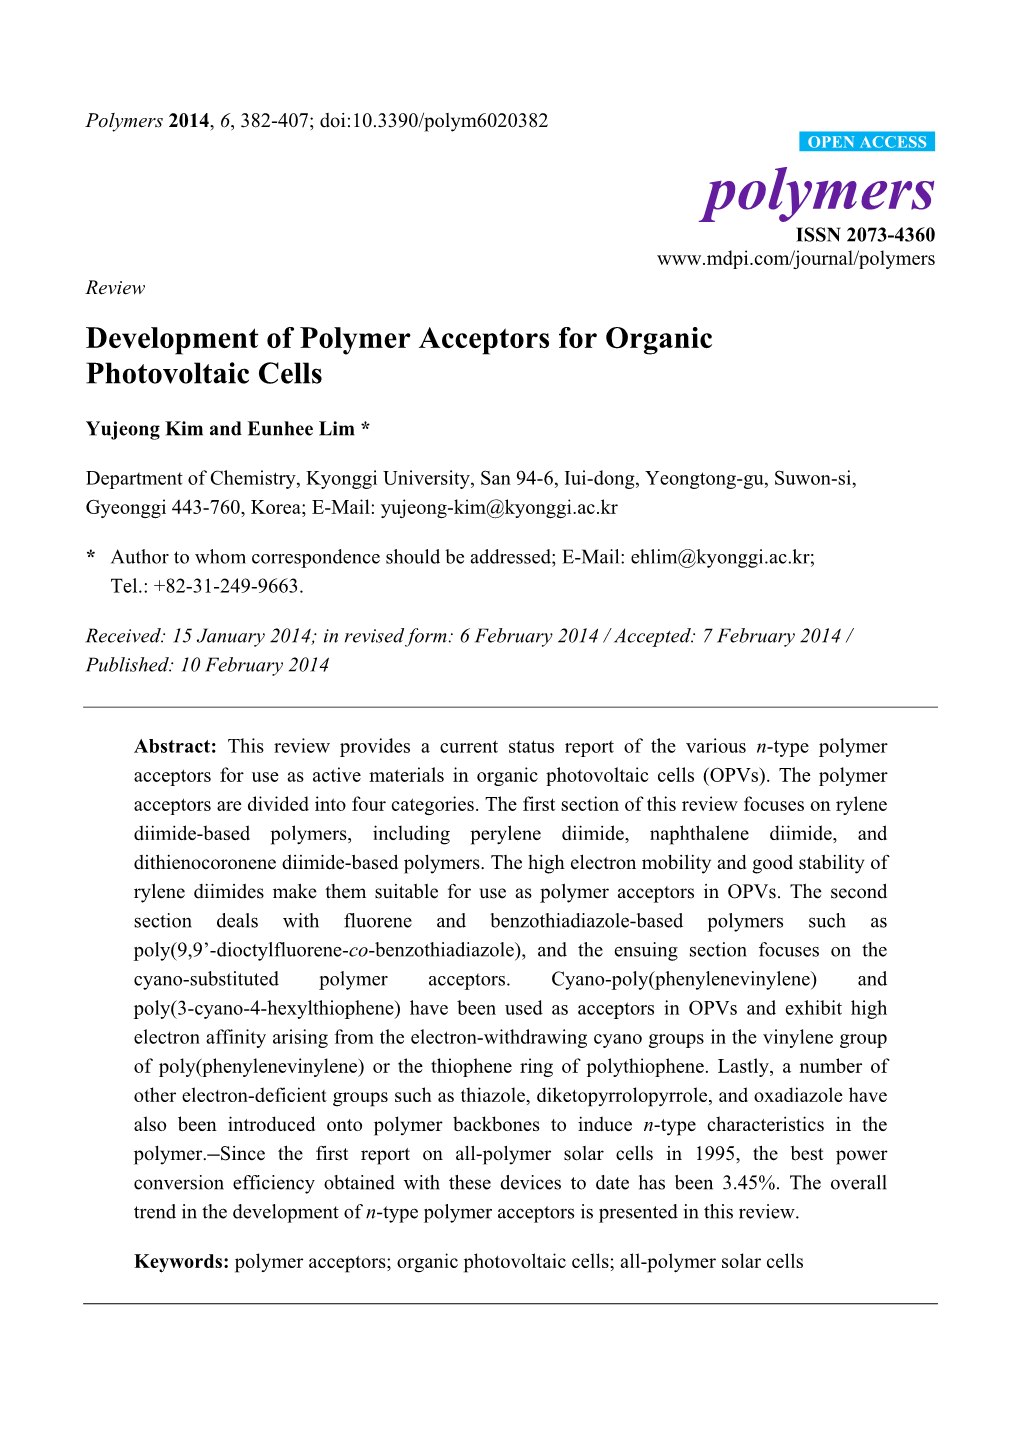 Development of Polymer Acceptors for Organic Photovoltaic Cells